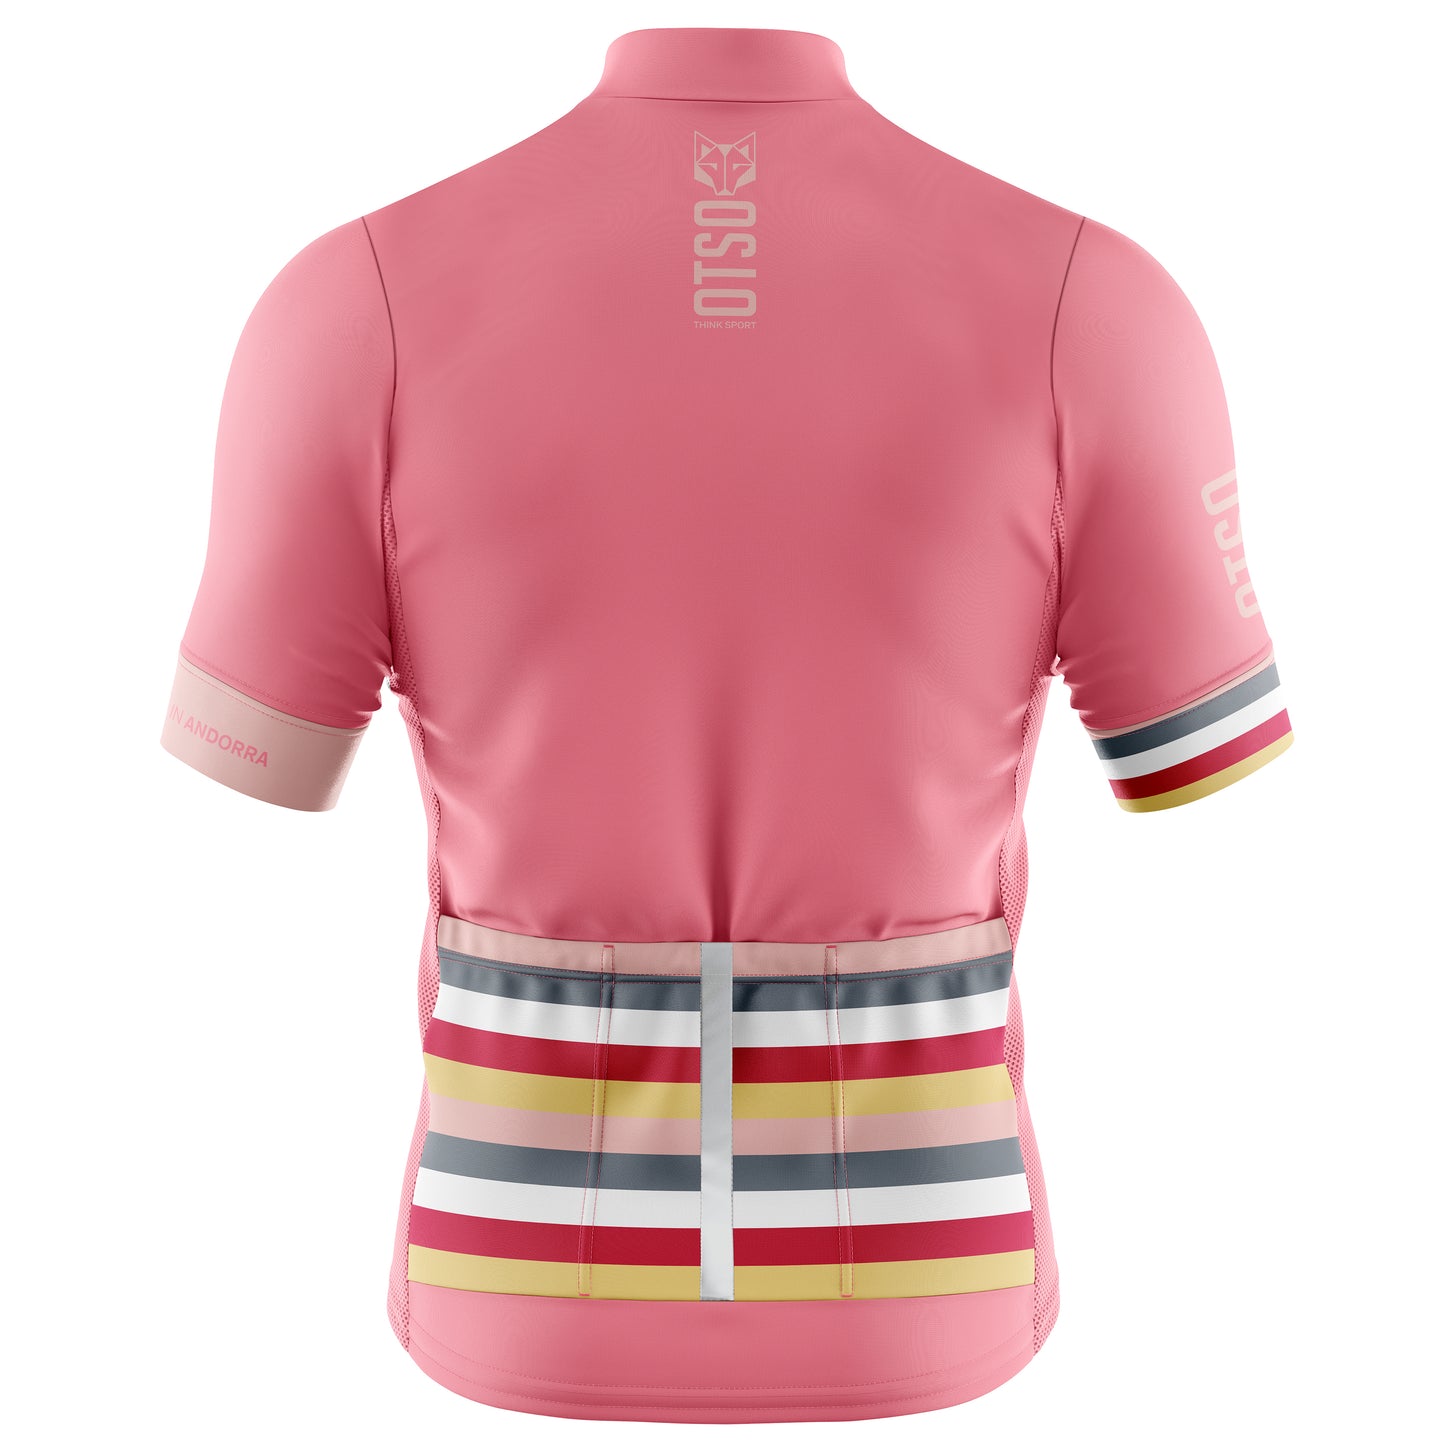 Maillot de ciclismo manga corta mujer - Stripes Coral Pink (Outlet)